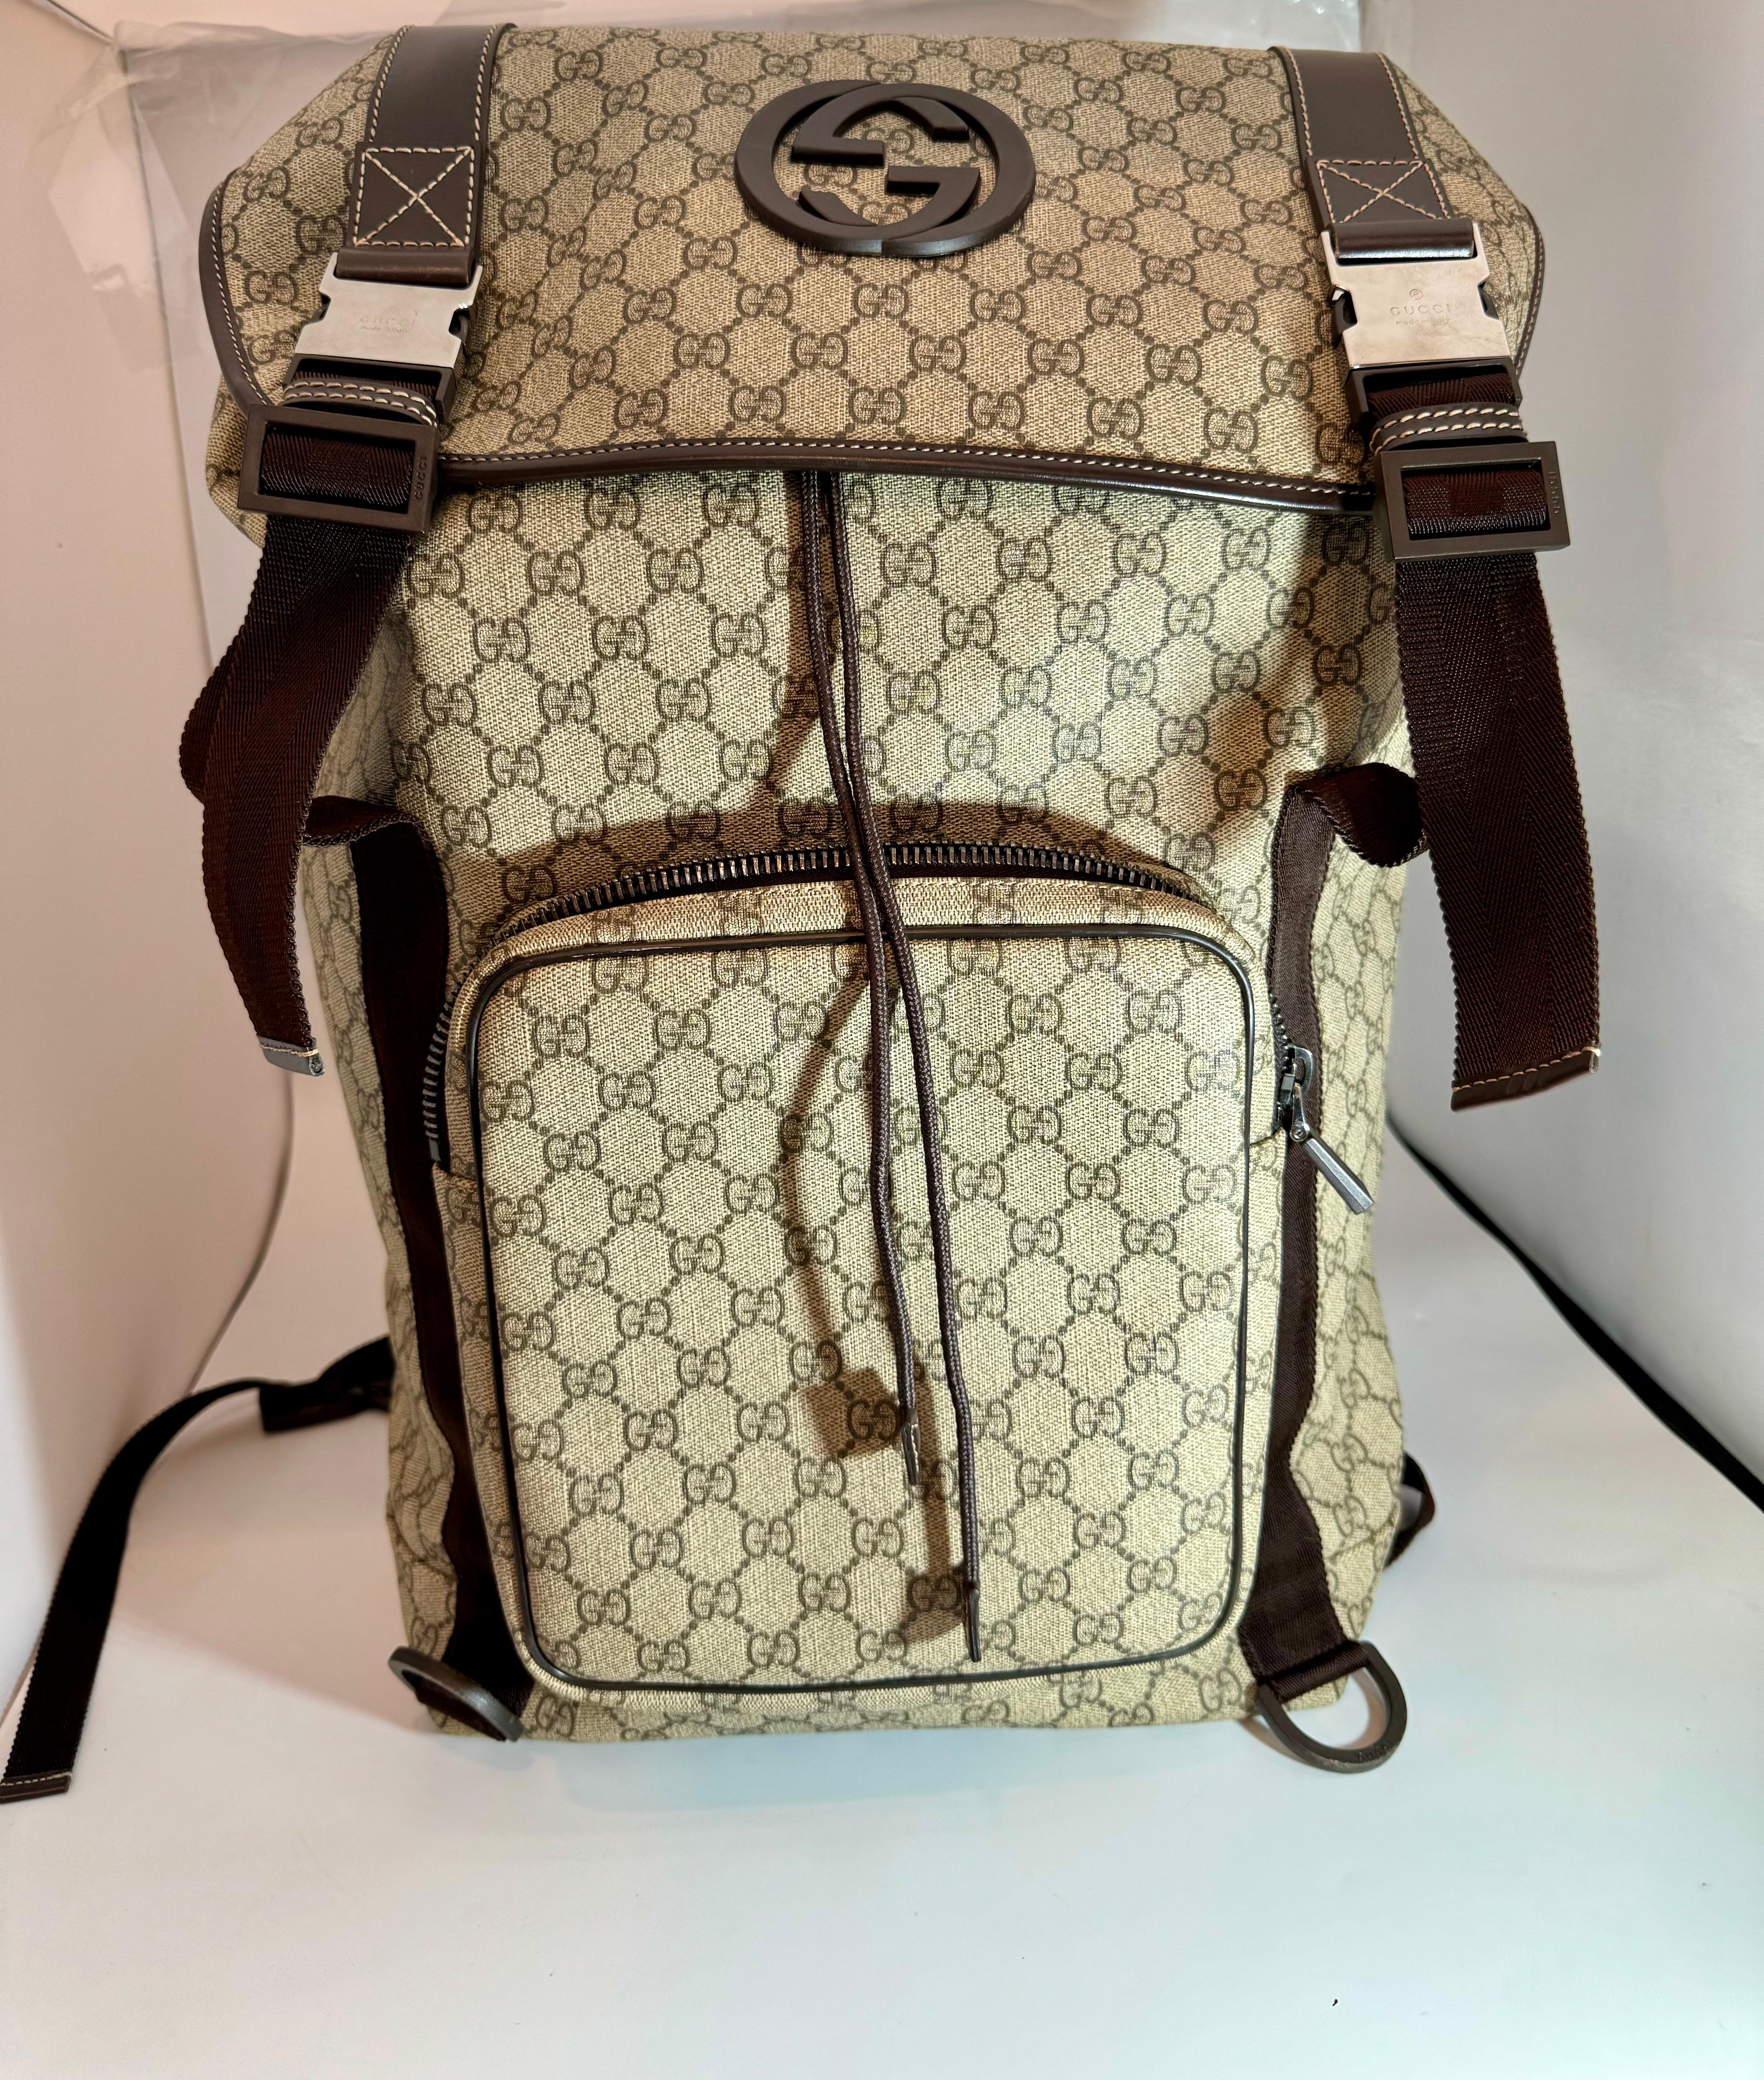 This is an authentic  Pre owned GUCCI GG EMBOSSED  Monogram Small  Backpack in Black. 
BRAND NEW 
DESCRIPTION
Brand
Gucci
Type
Backpacks
Department
Men
Size
Large
Color
Silver
Model
GG
Theme
Metal
Style
Backpack
Material
Canvas